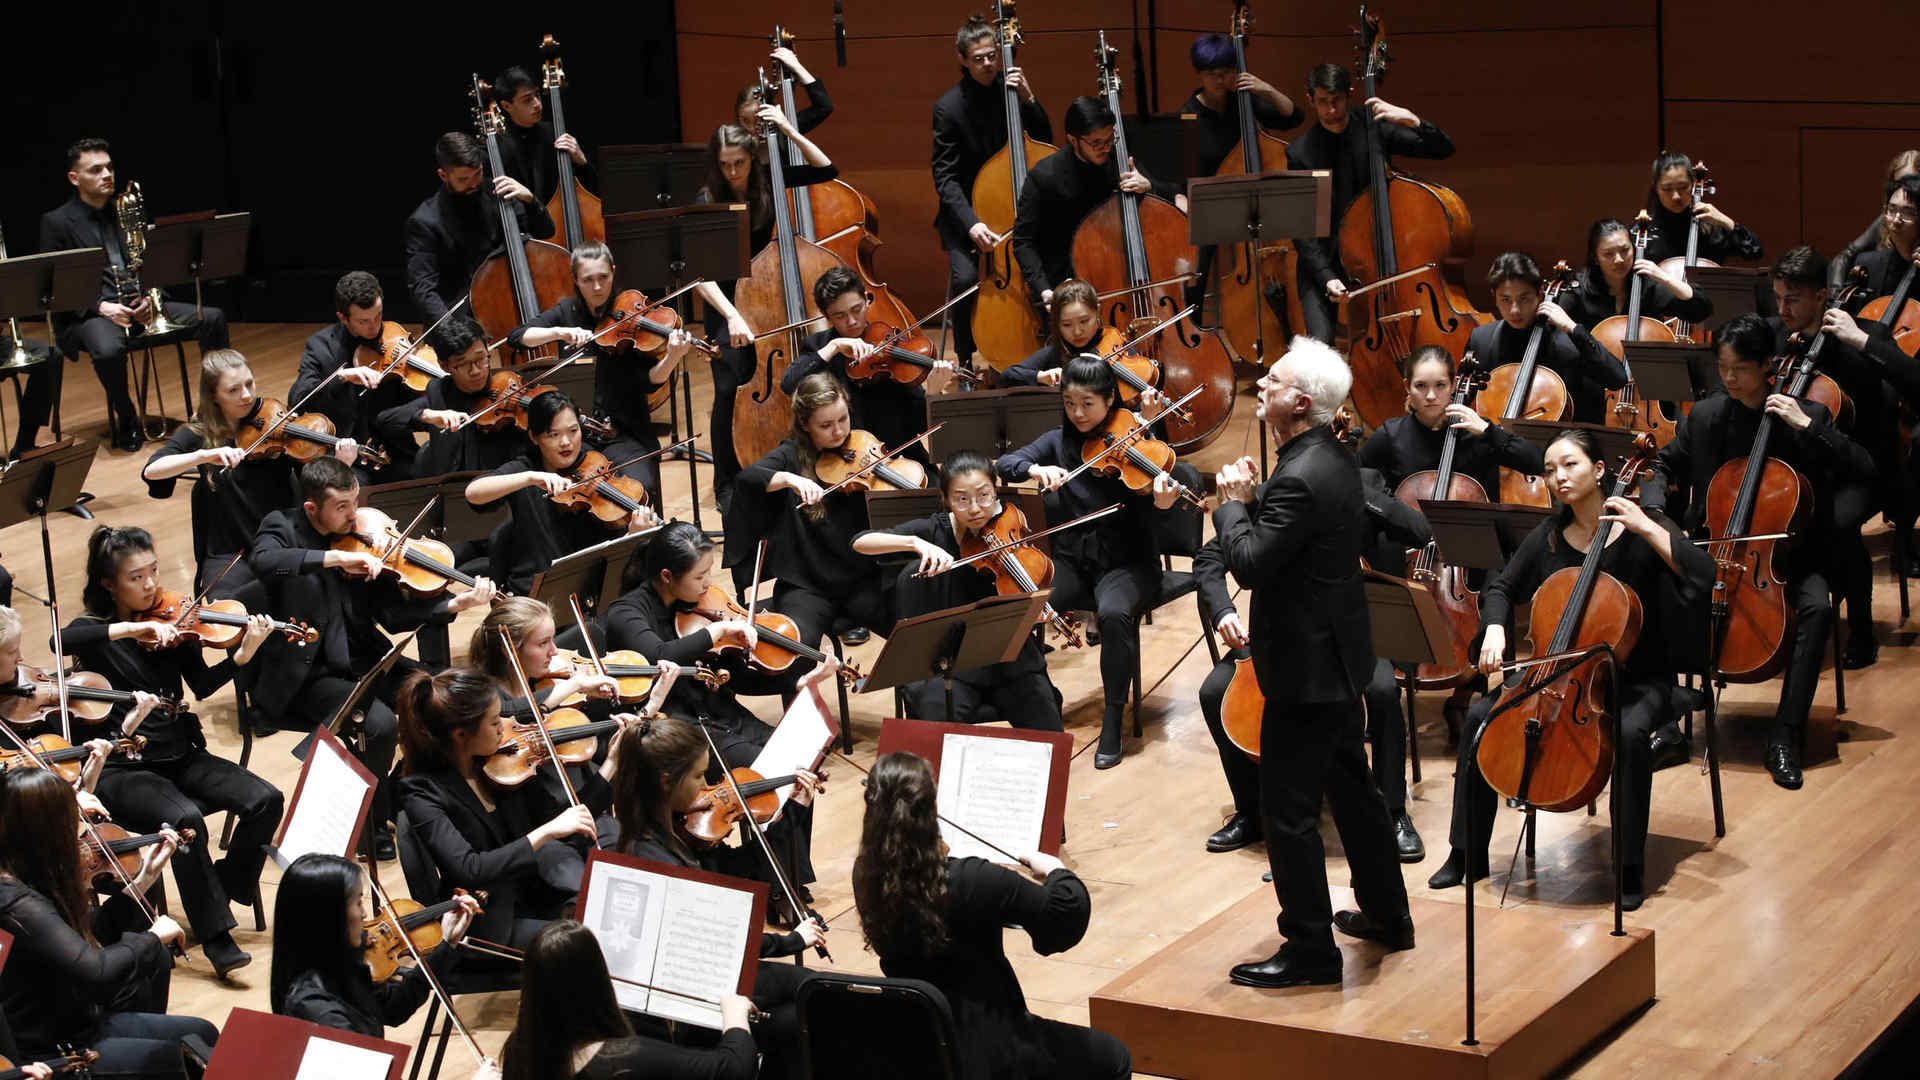 The Juilliard Orchestra performs on stage at Alice Tully Hall, conducted by John Adams